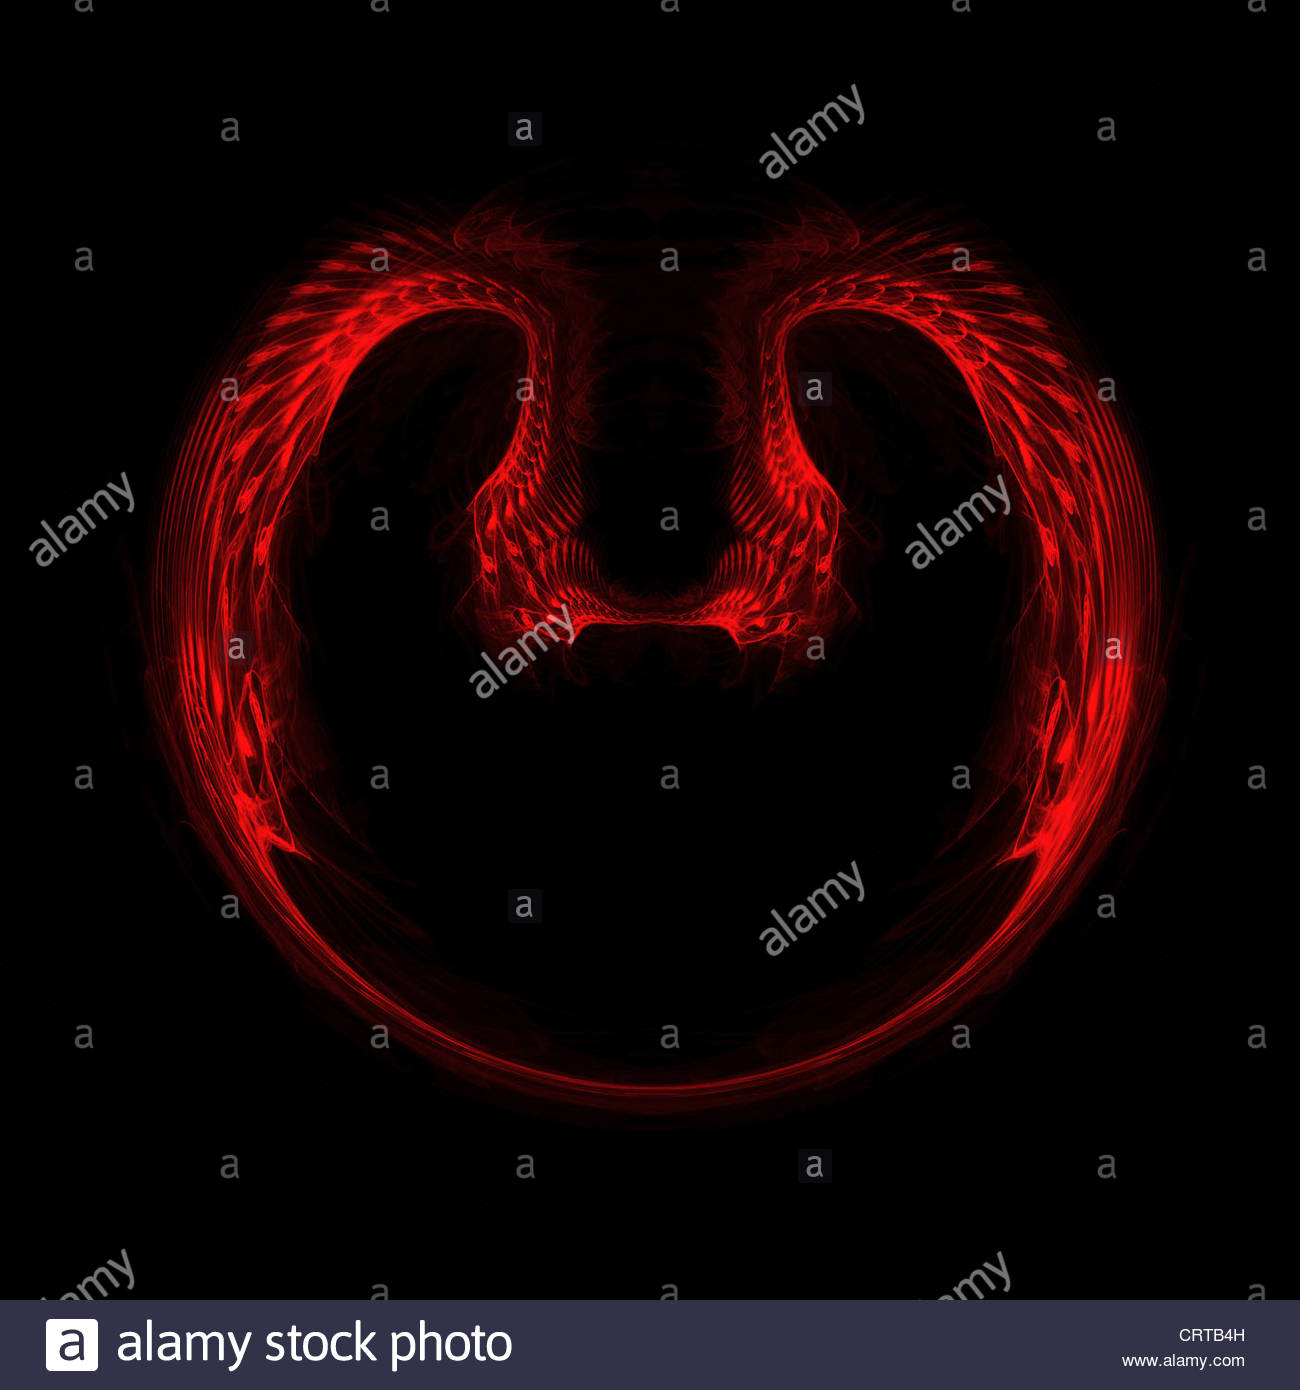 Fractal Red Wings On A Black Background Abstract Image In Gothic